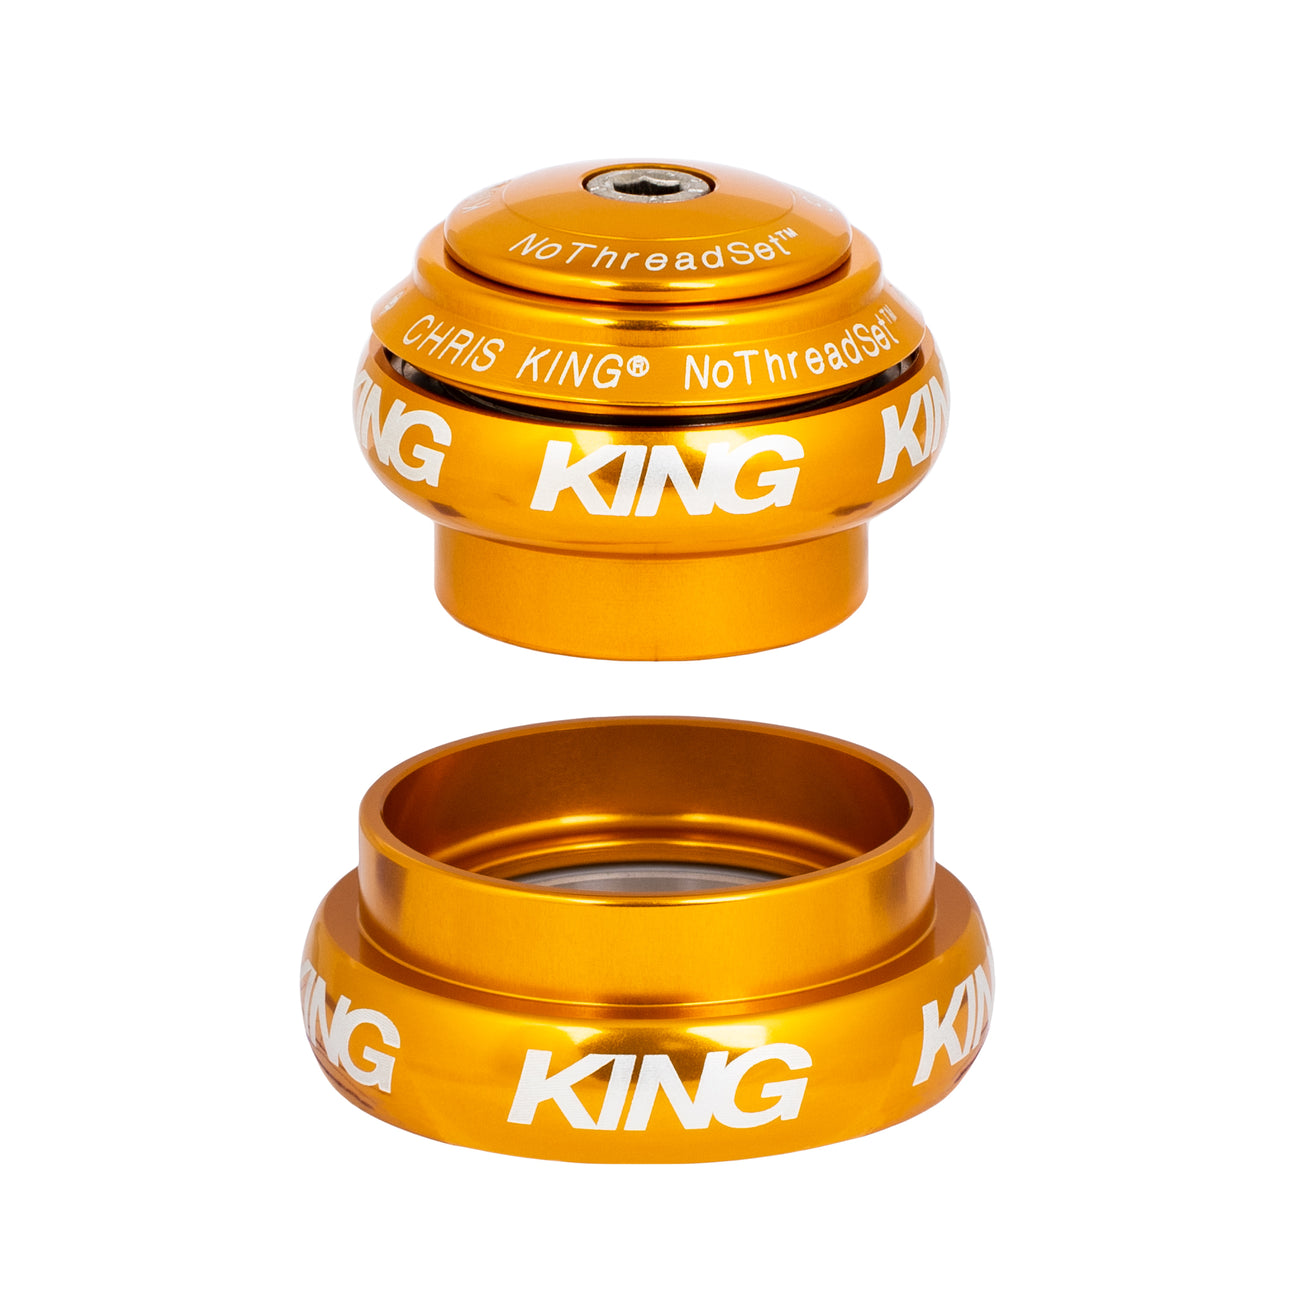 Chris King tapered nothreadset headset in gold